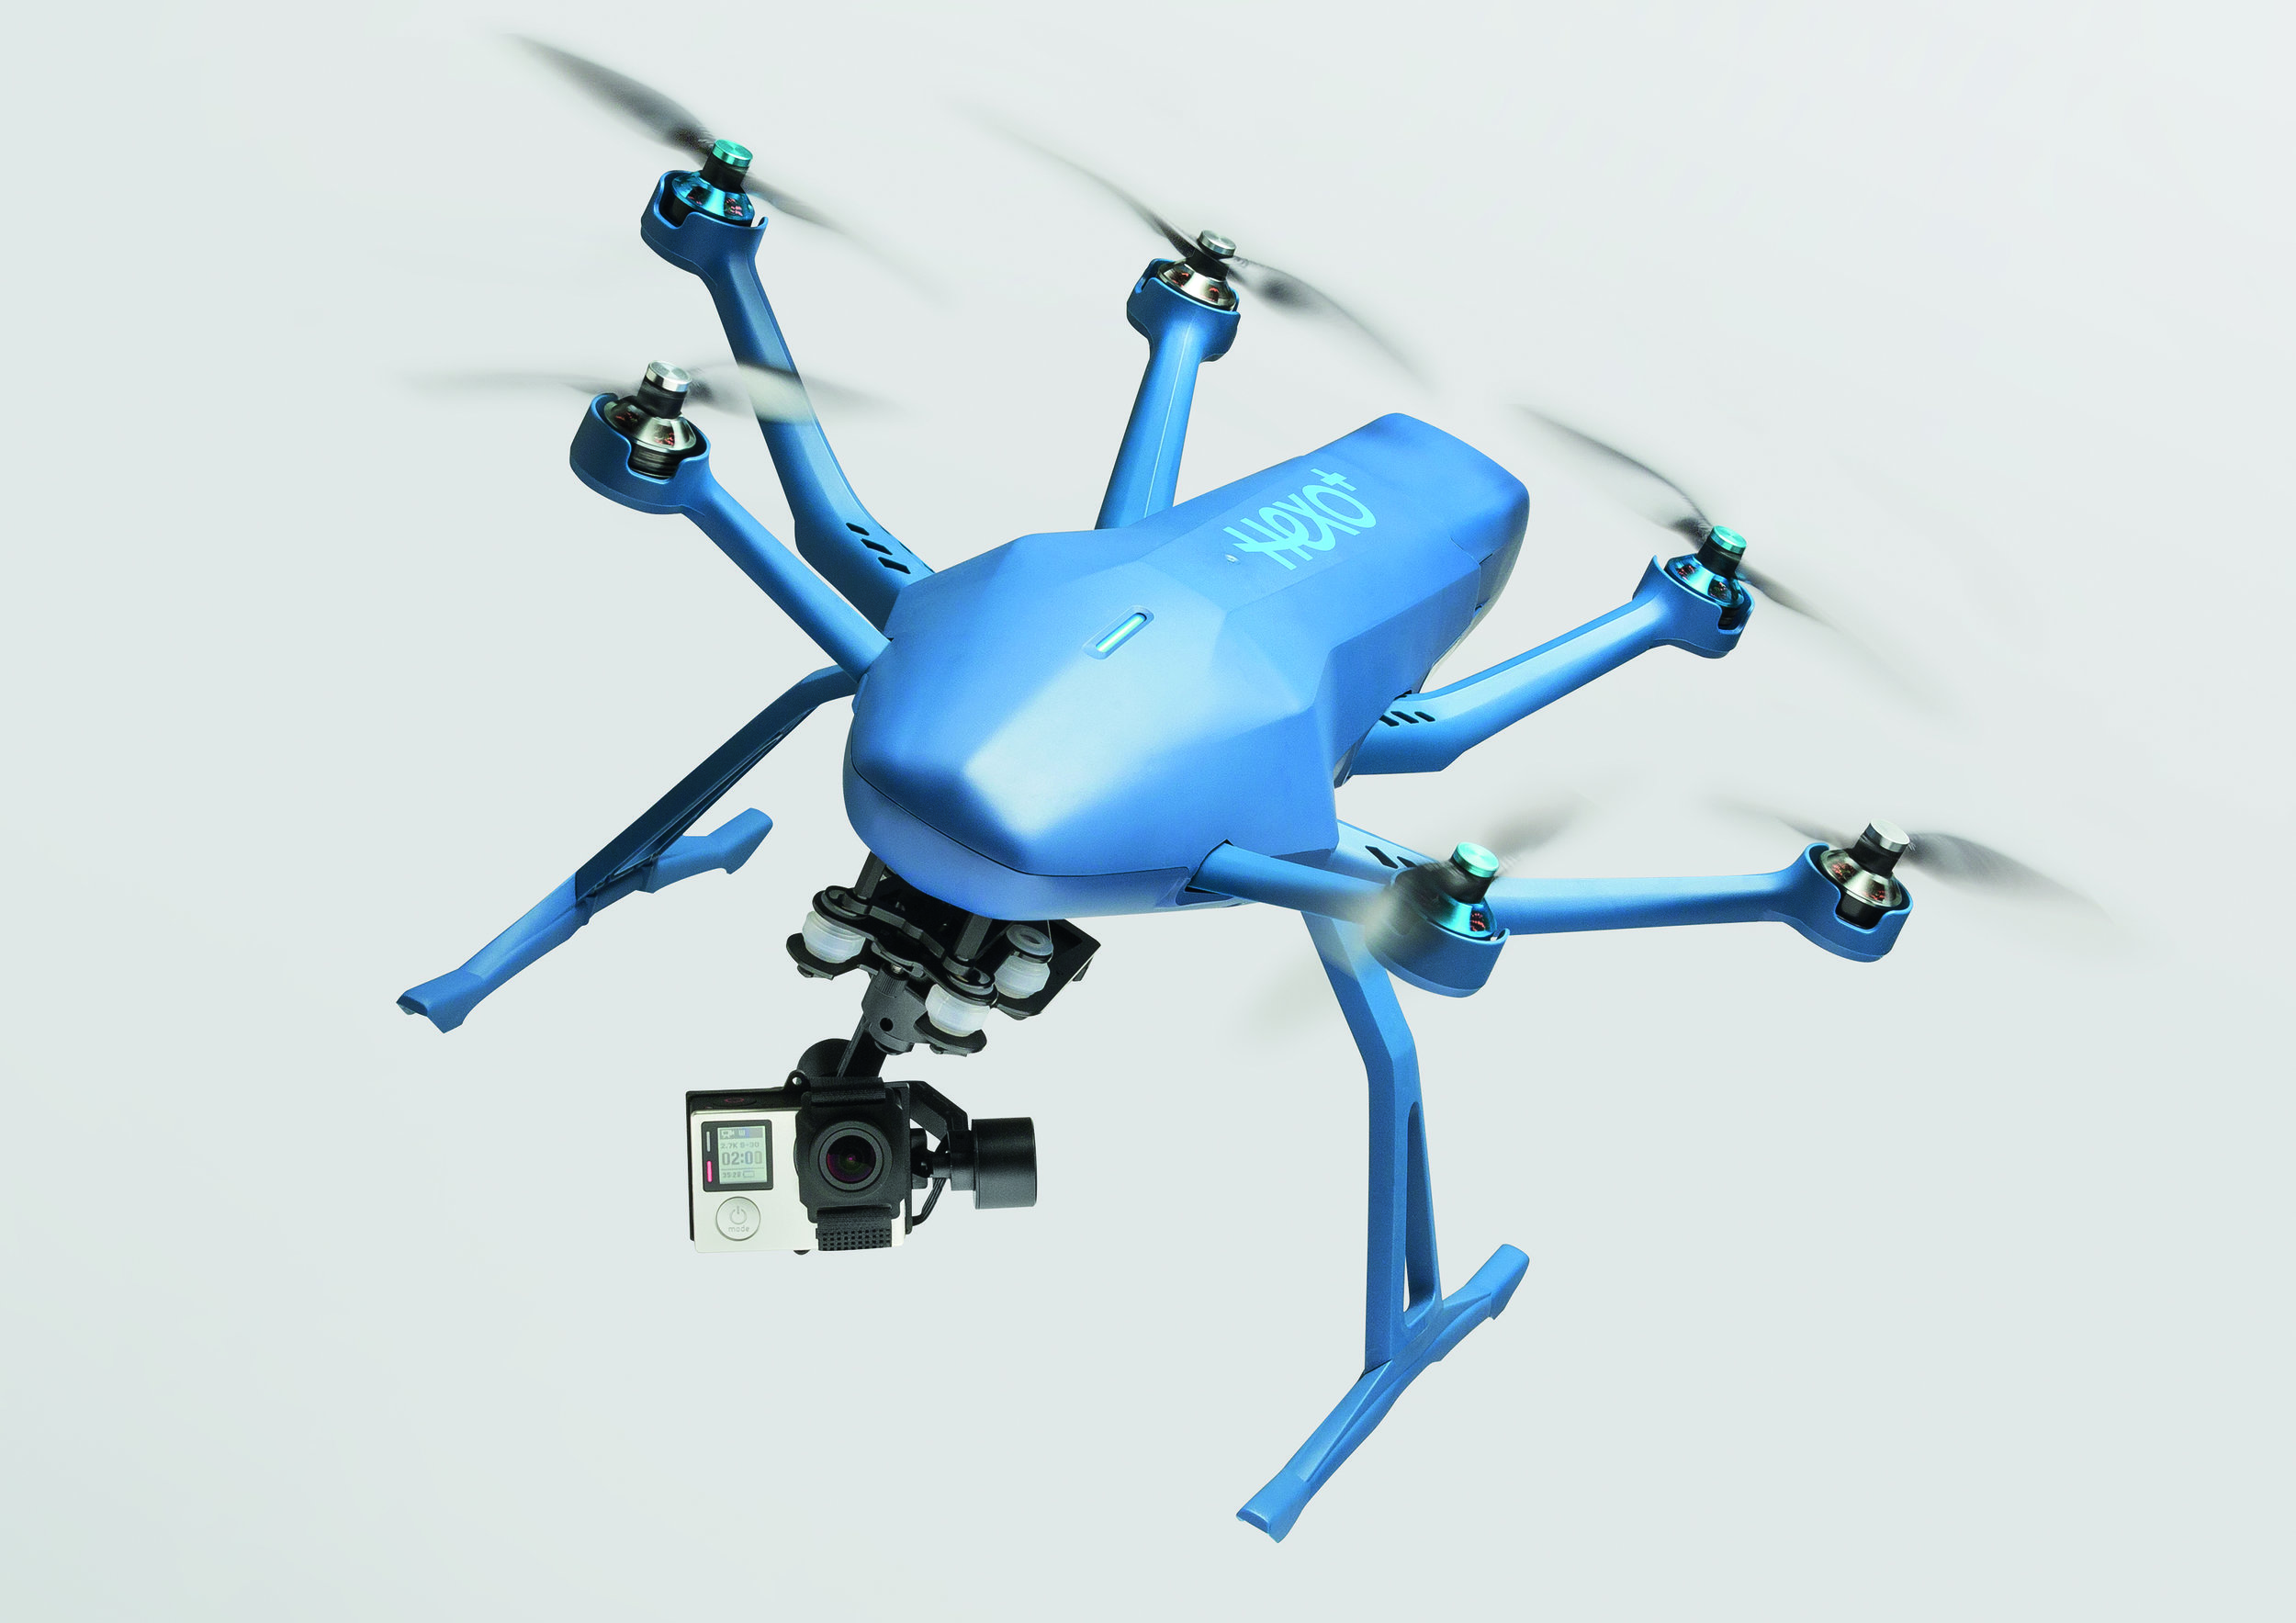 The Hexo+ drone captures images and videos with a mounted GoPro  (Image courtesy Squadrone System)